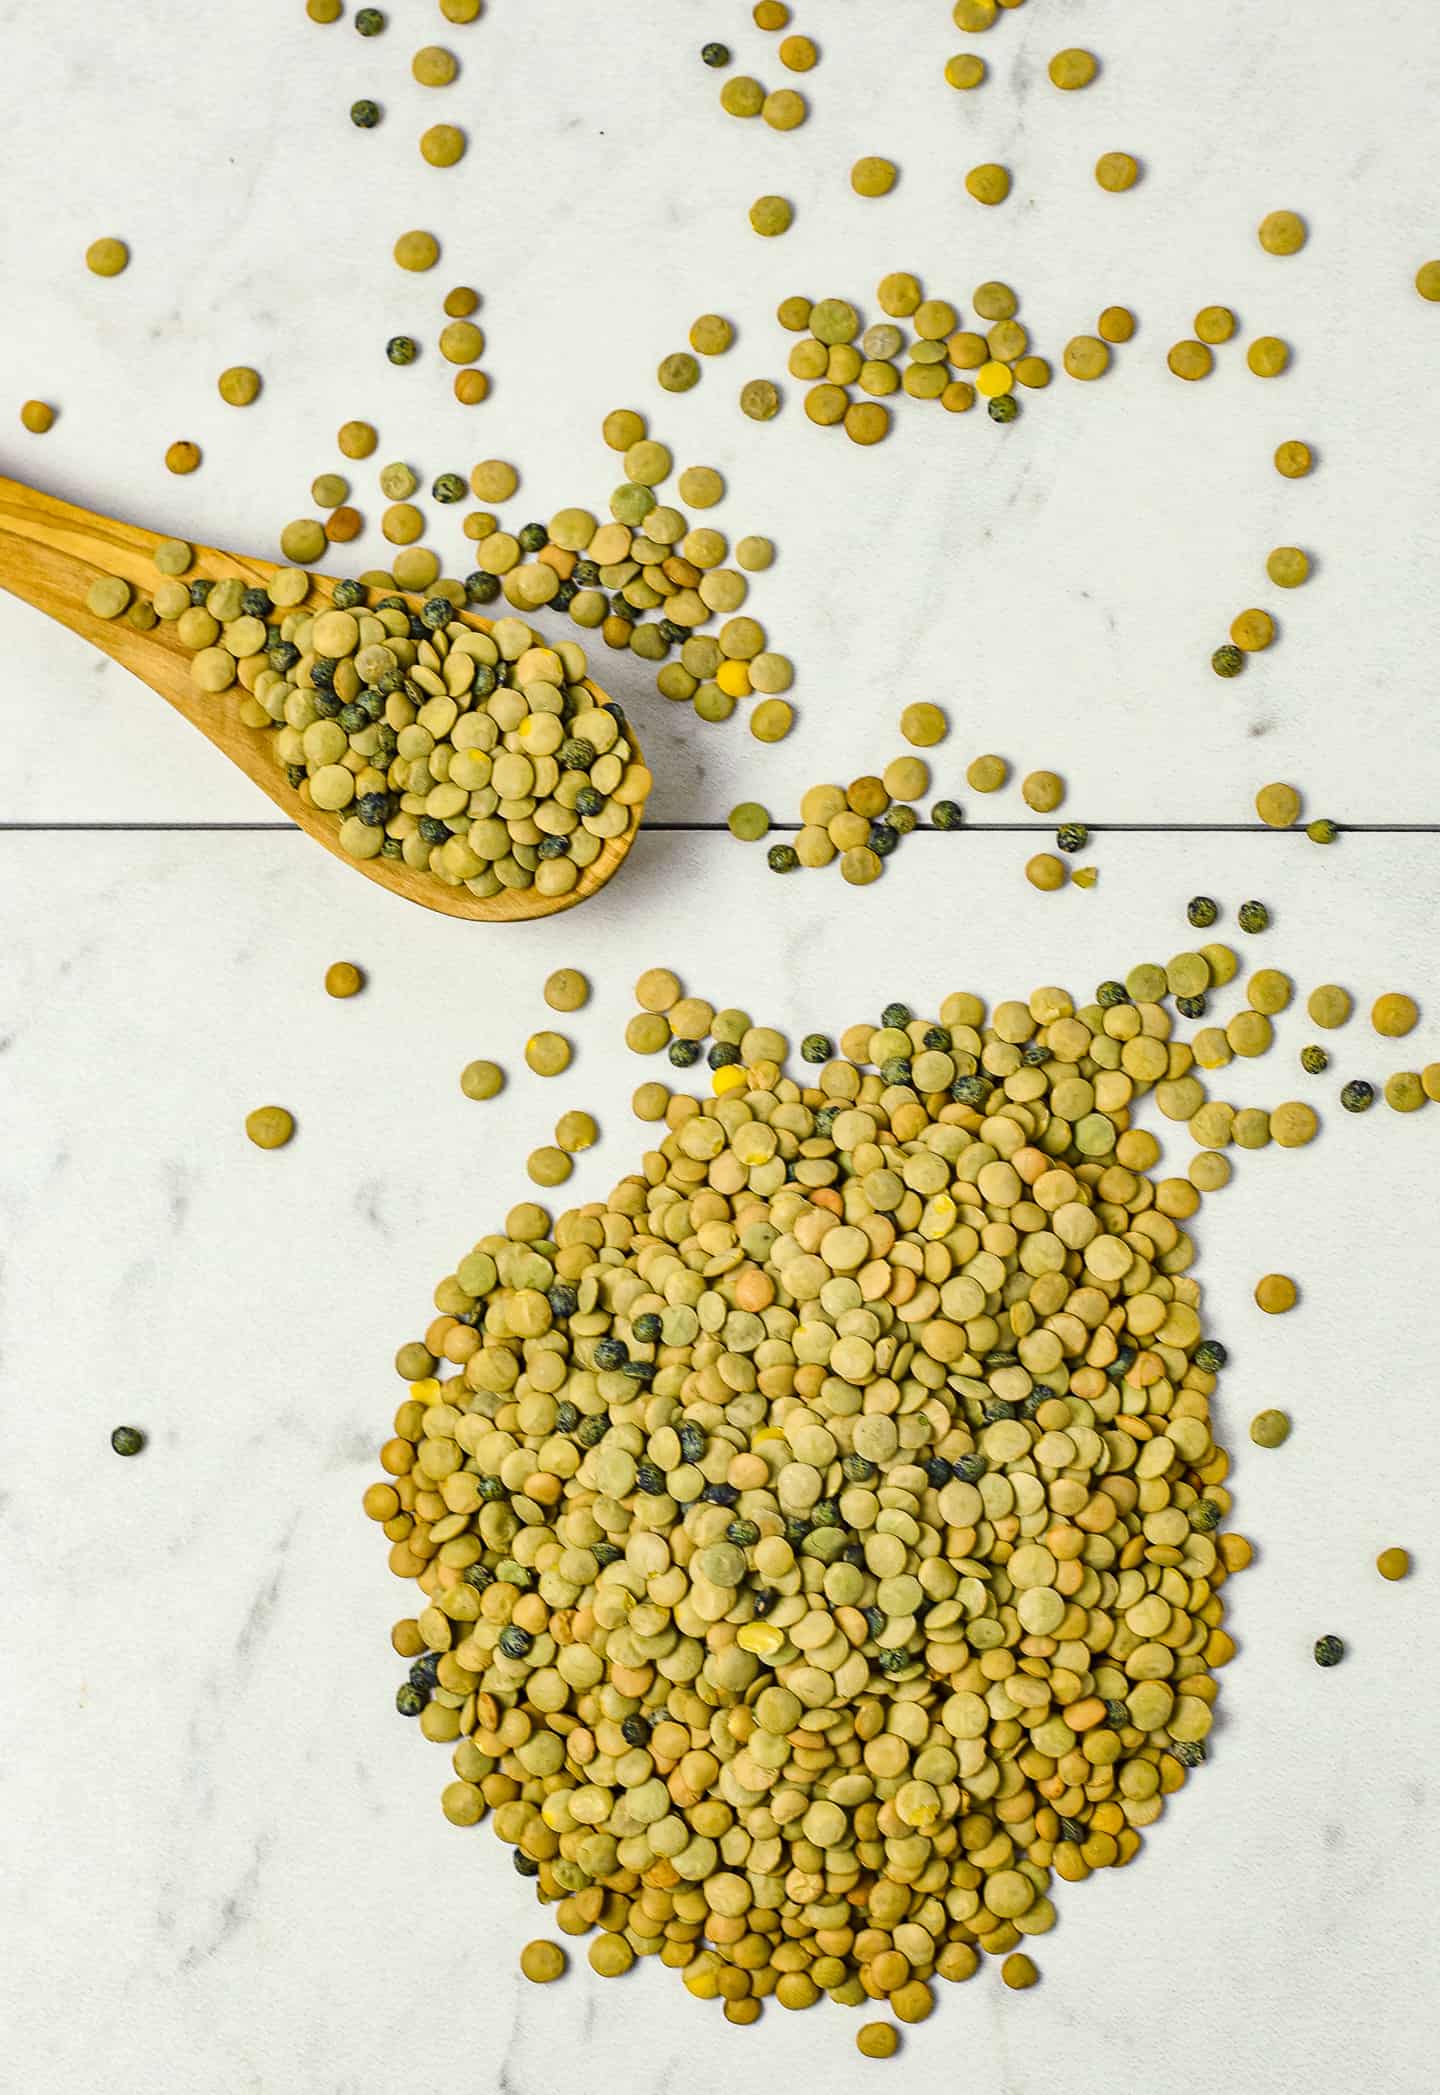 How to cook lentils perfectly every time! Lentils are so easy to make, inexpensive, delicious, and packed with protein and fiber. They're the perfect addition to salads, side dishes, and more.